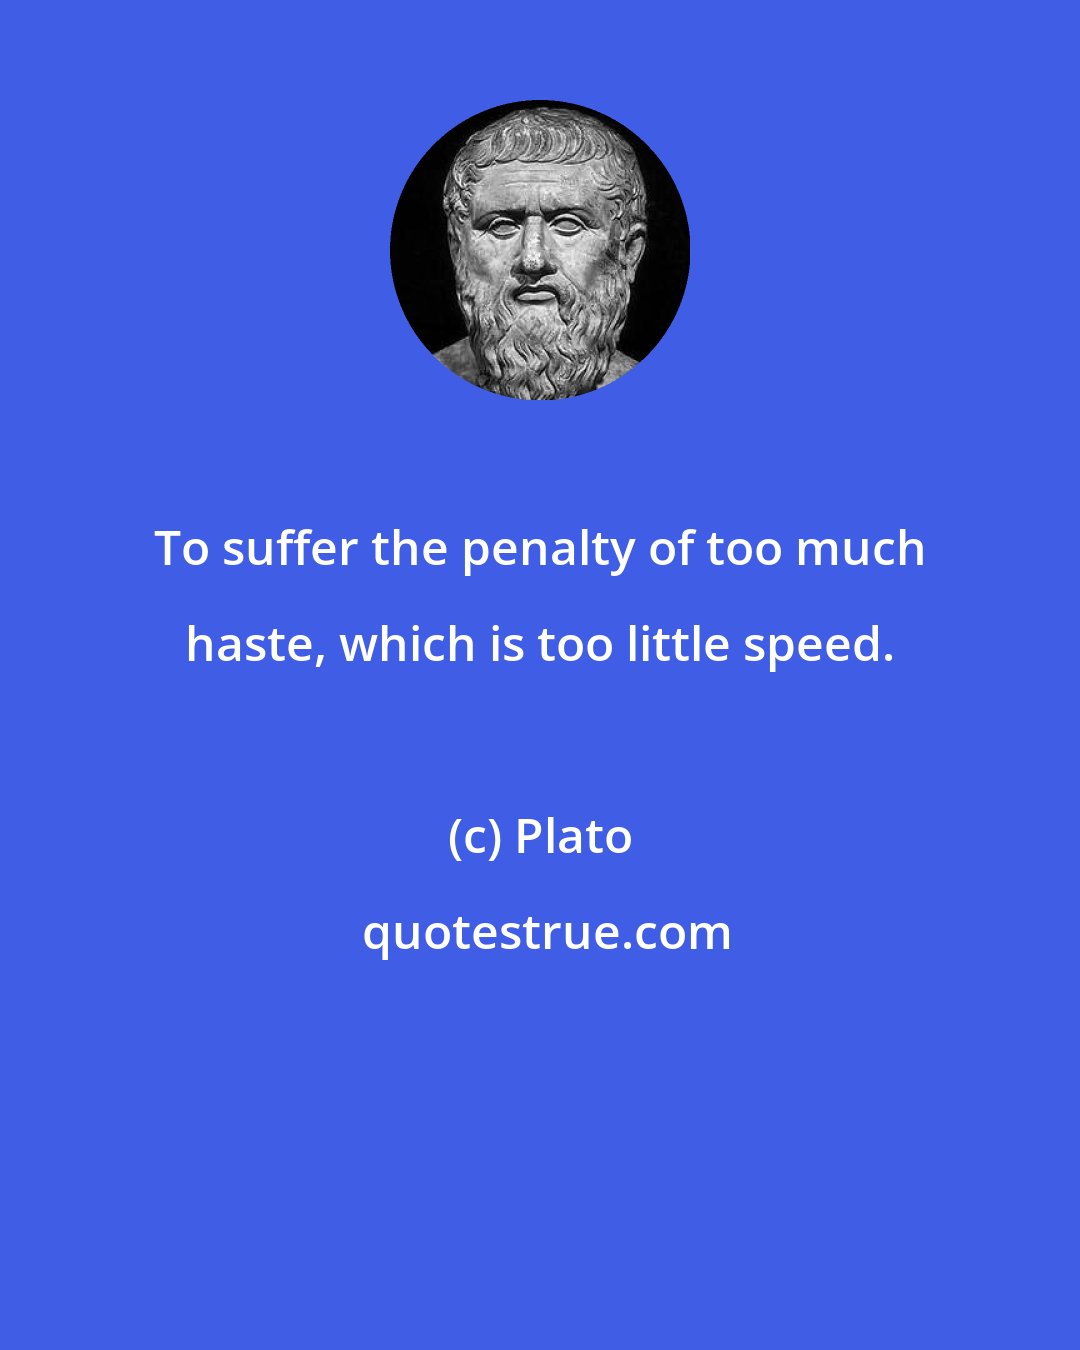 Plato: To suffer the penalty of too much haste, which is too little speed.